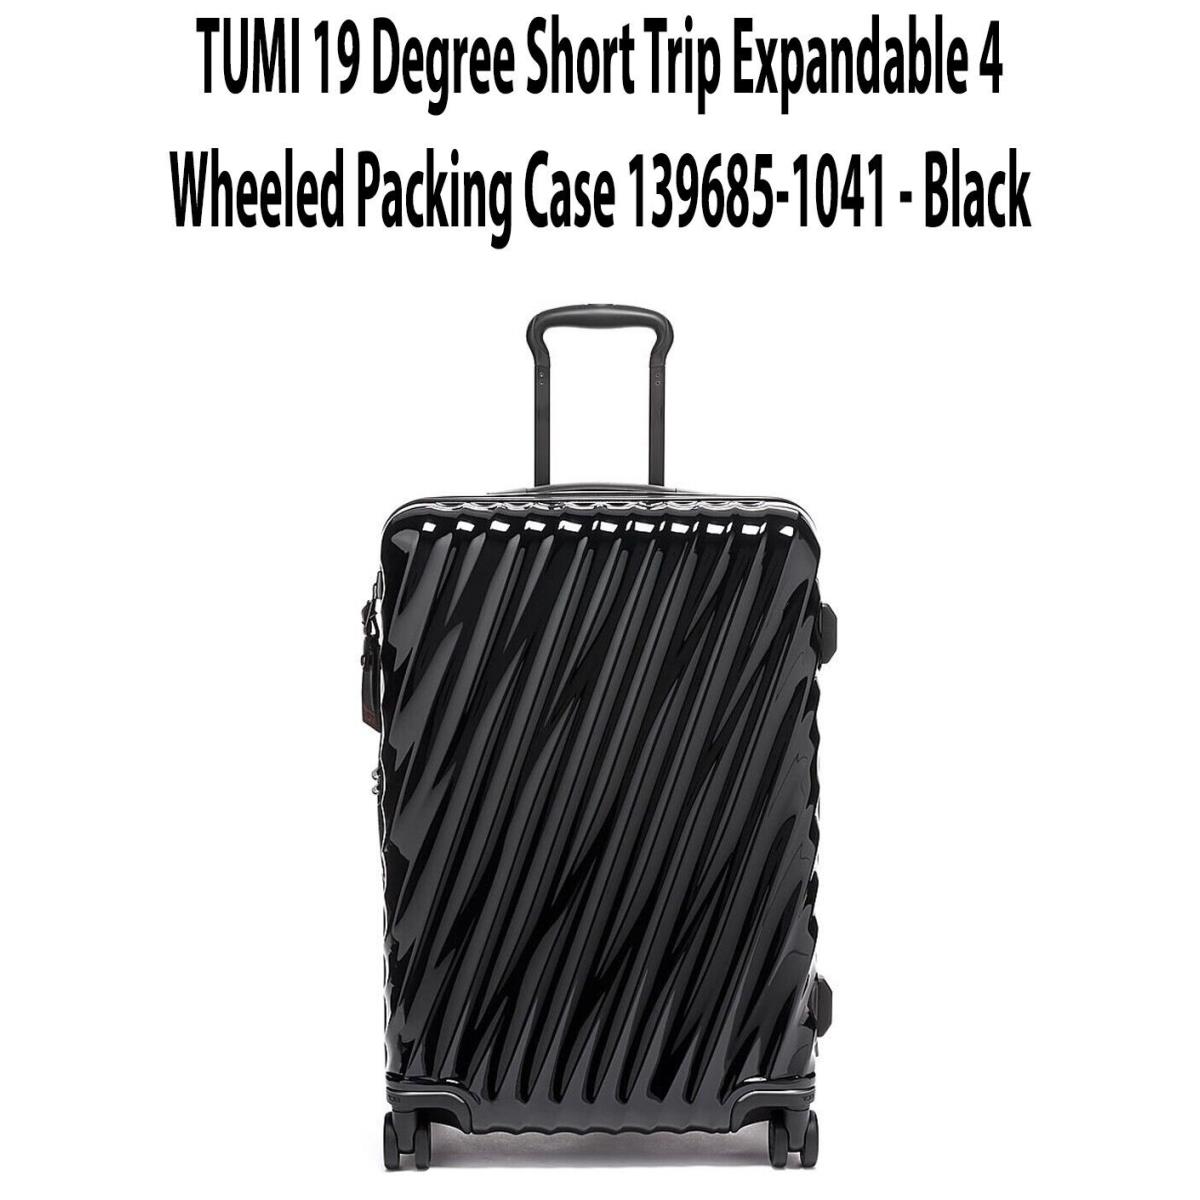 Tumi Spinner 19 Degree Short Trip Expandable 4 Wheeled Packing Case 139685-1041